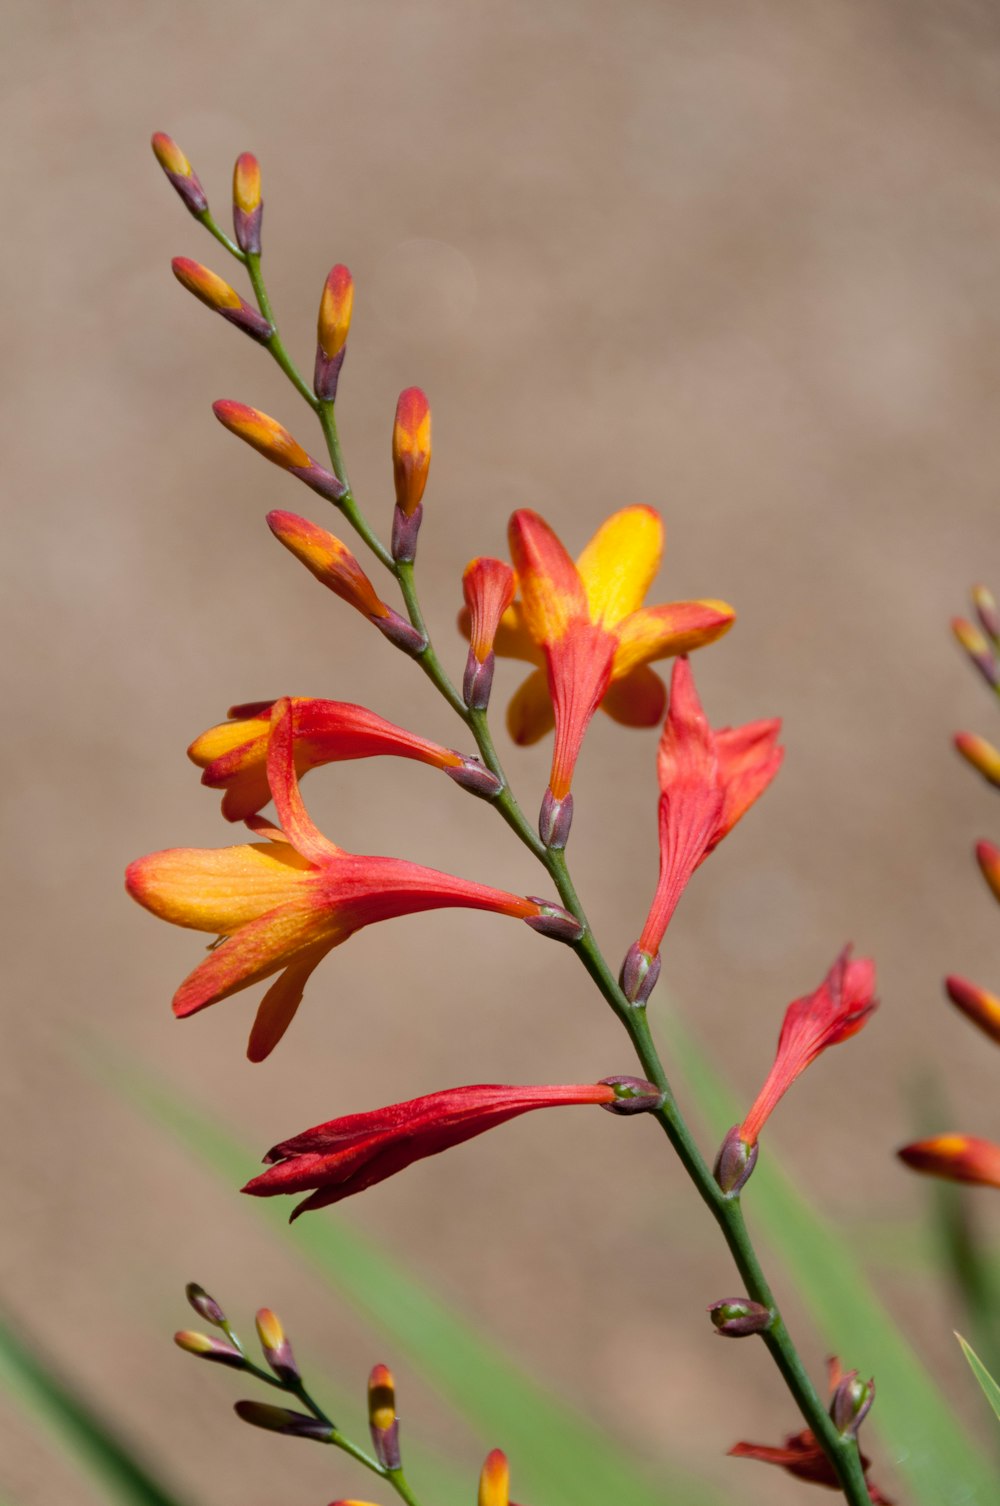 a close up of a plant with red and yellow flowers